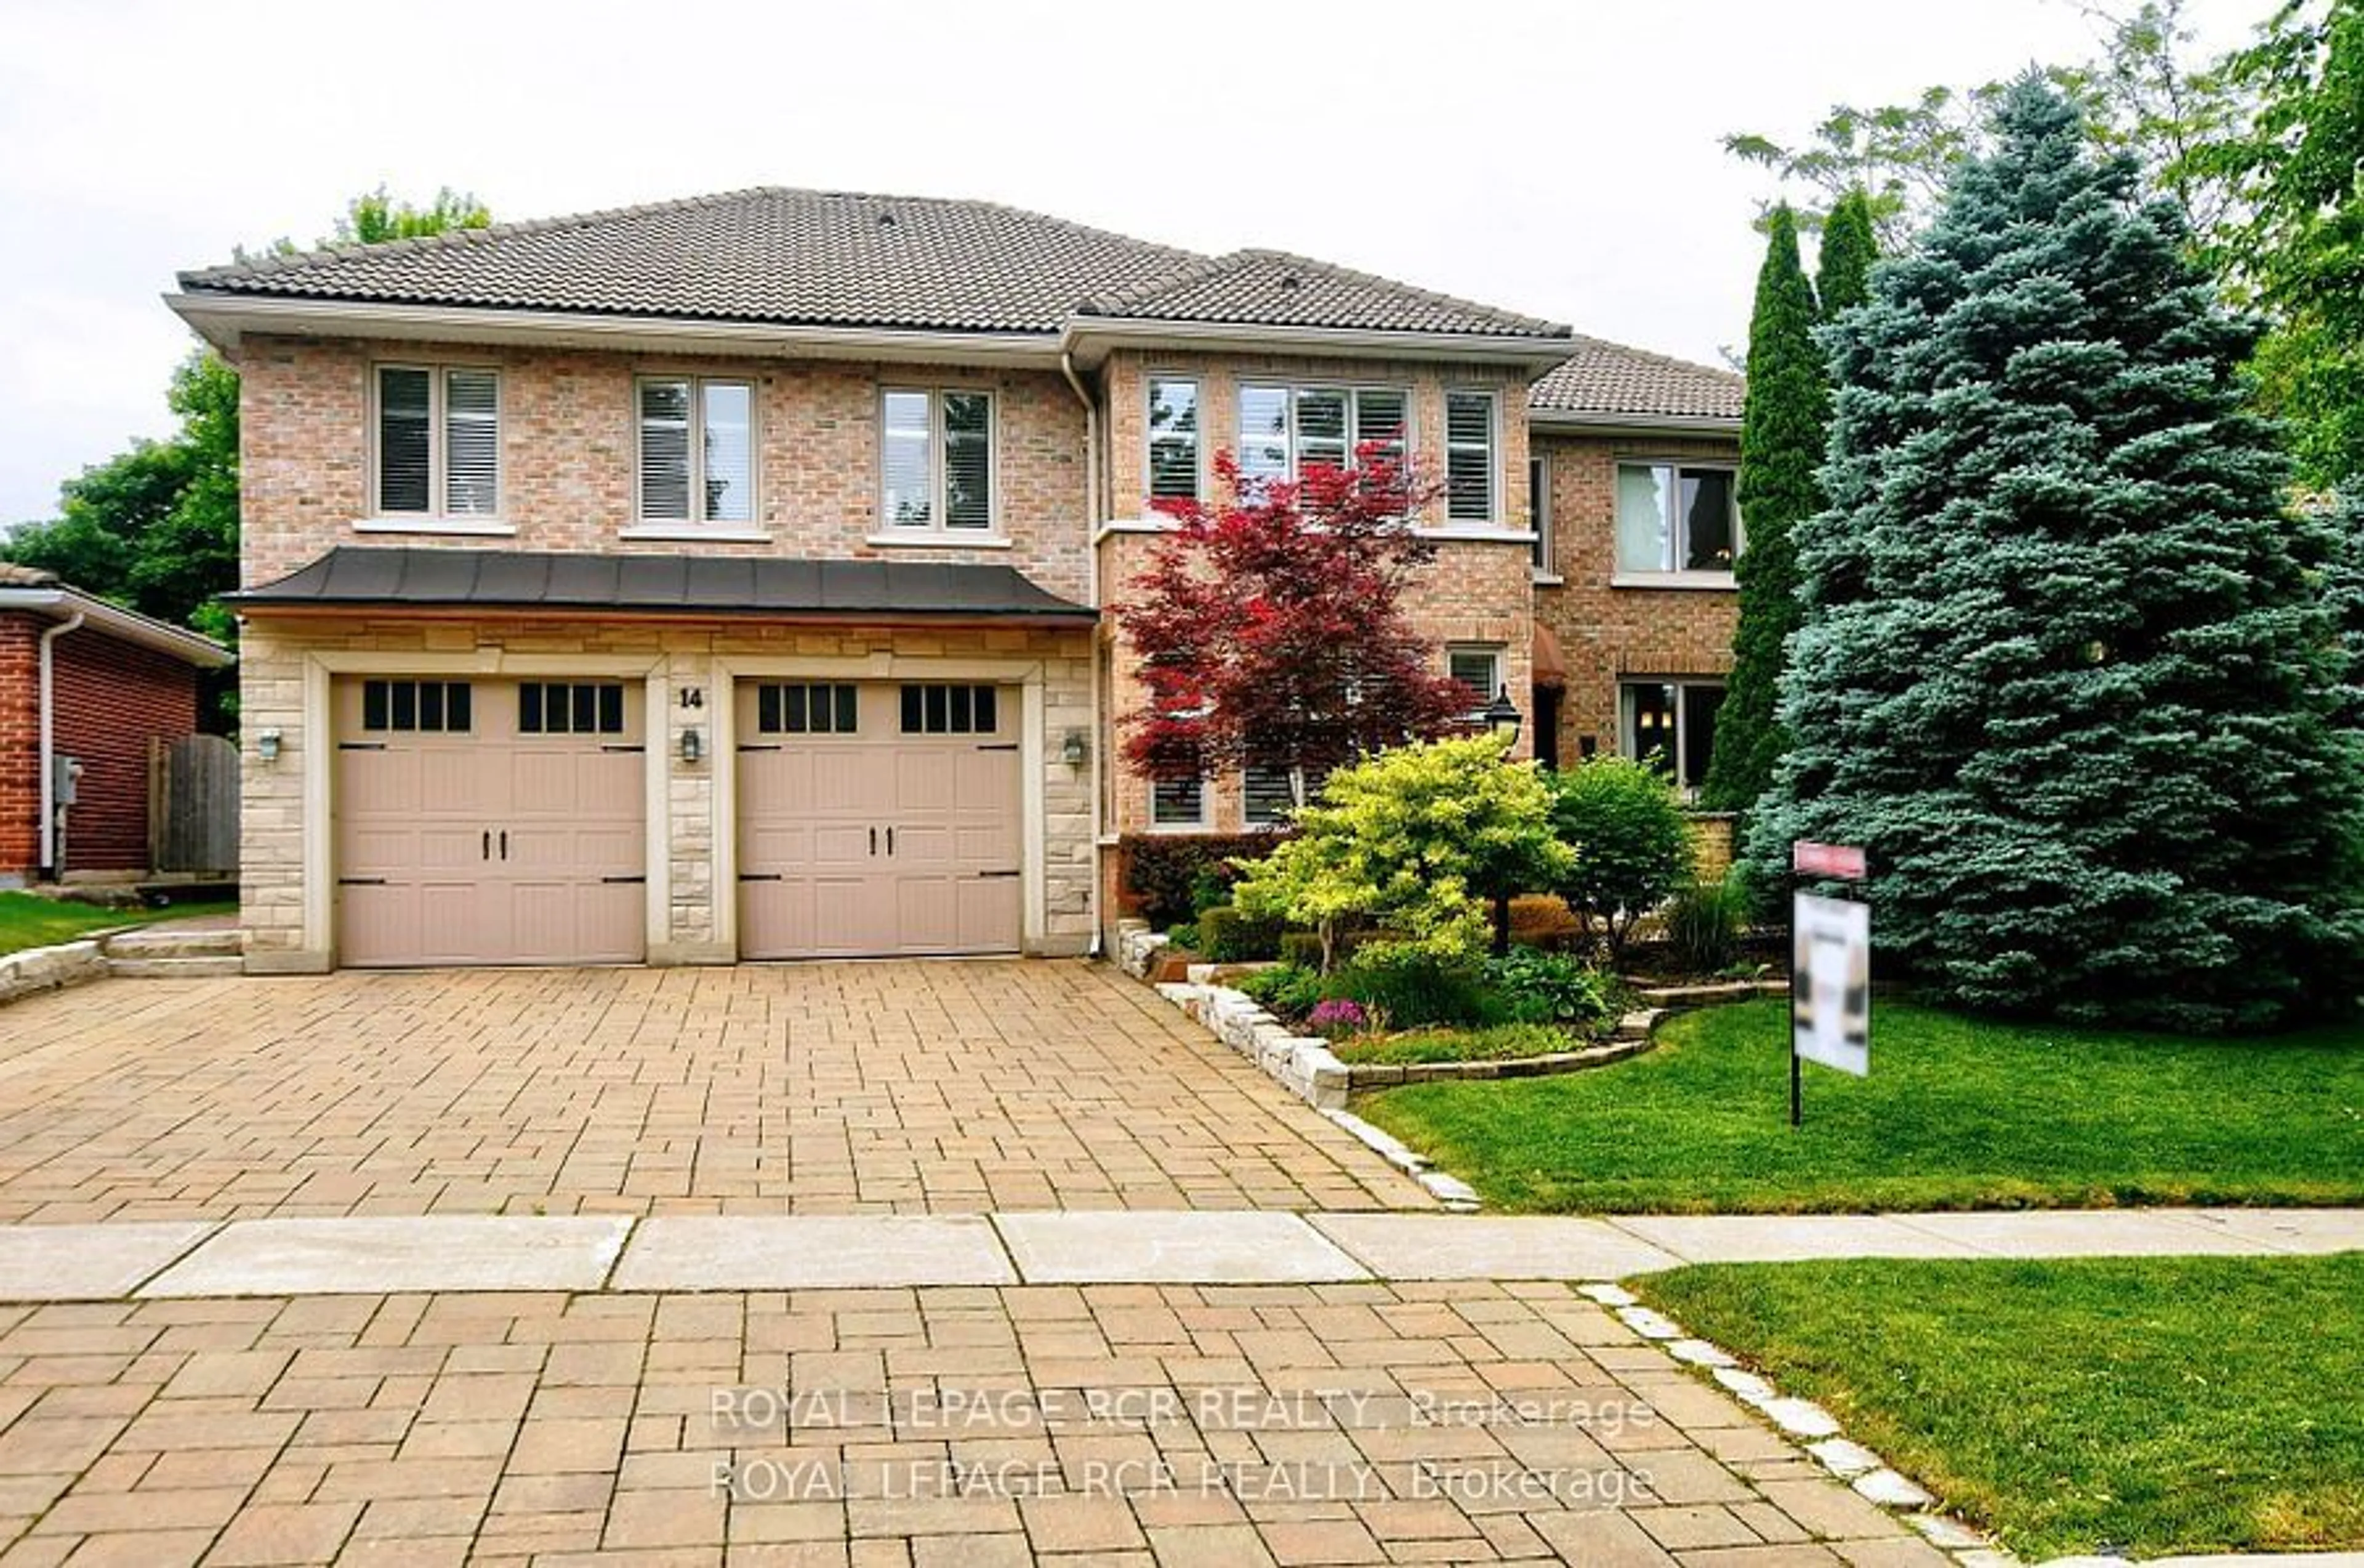 Home with brick exterior material for 14 Wethersfield Crt, Aurora Ontario L4G 5L9